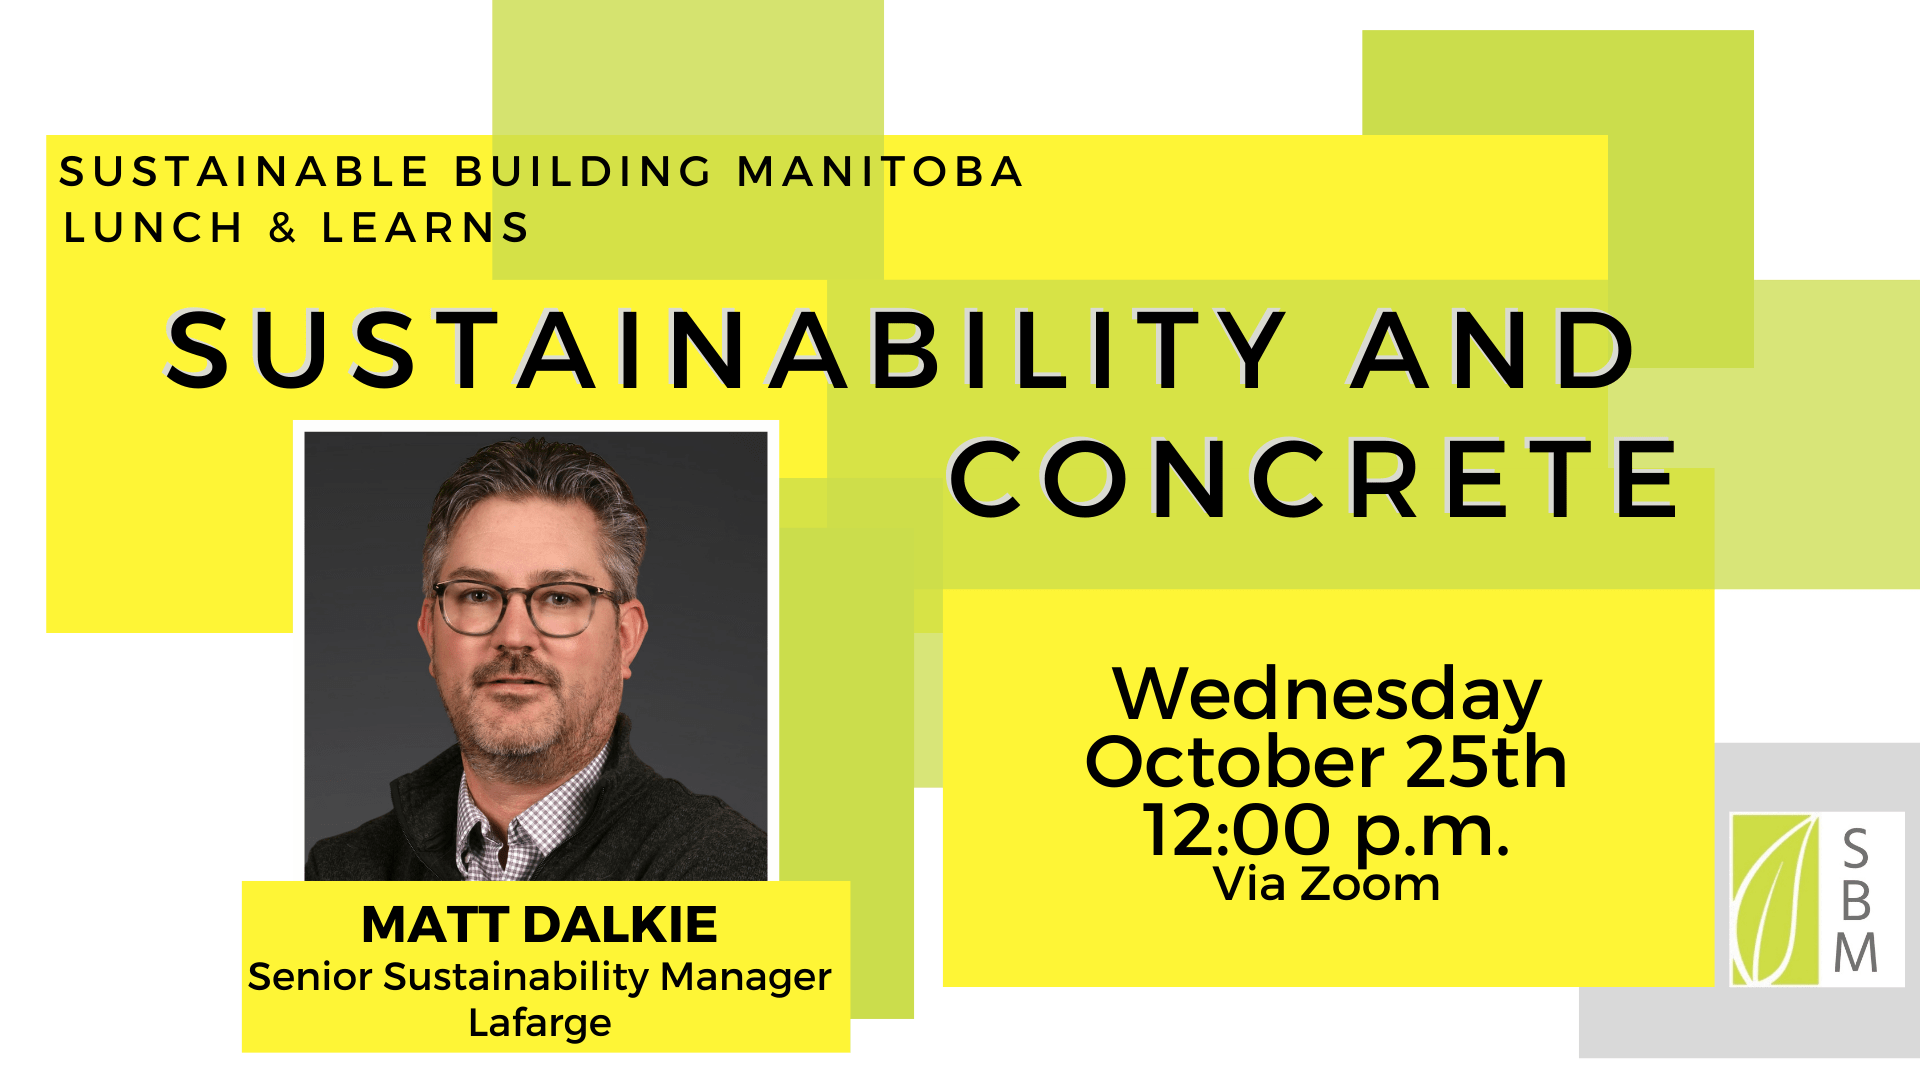 SBM Lunch and Learn Sustainability and Concrete Wednesday October 25th 12:00 via Zoom SPEAKER Matt Dalkie Senior Sustainability Manager Lafarge